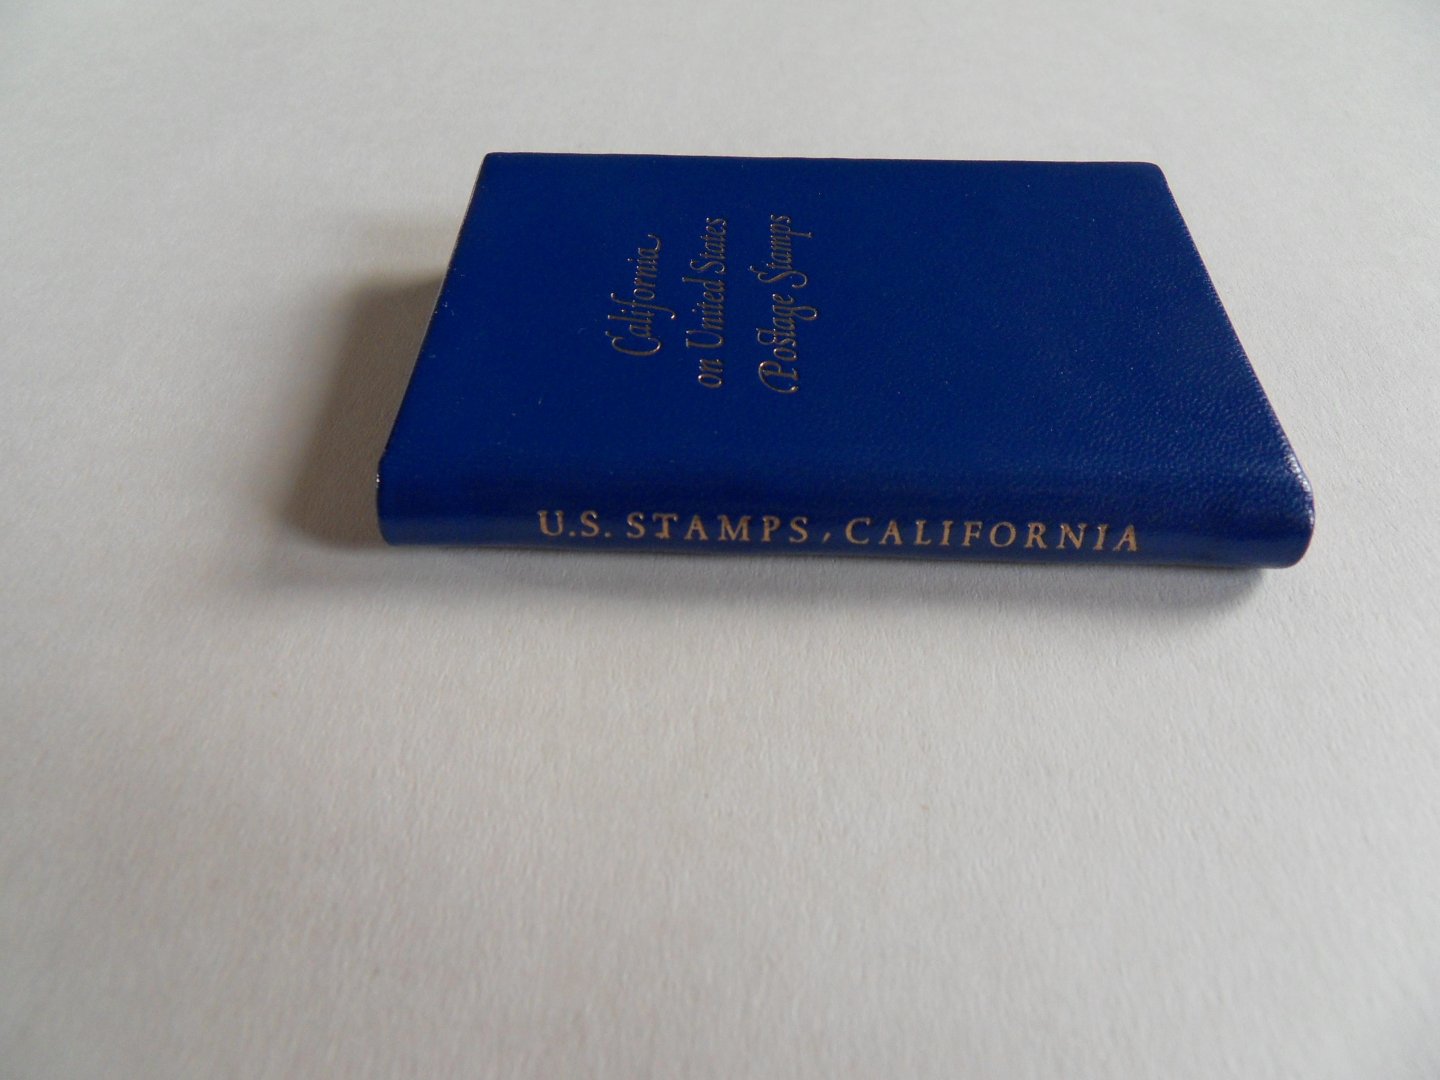 Weber, Francis J. - California on United States Postage Stamps. [ Oplage van 1500 exemplaren - 1500 copies only ].